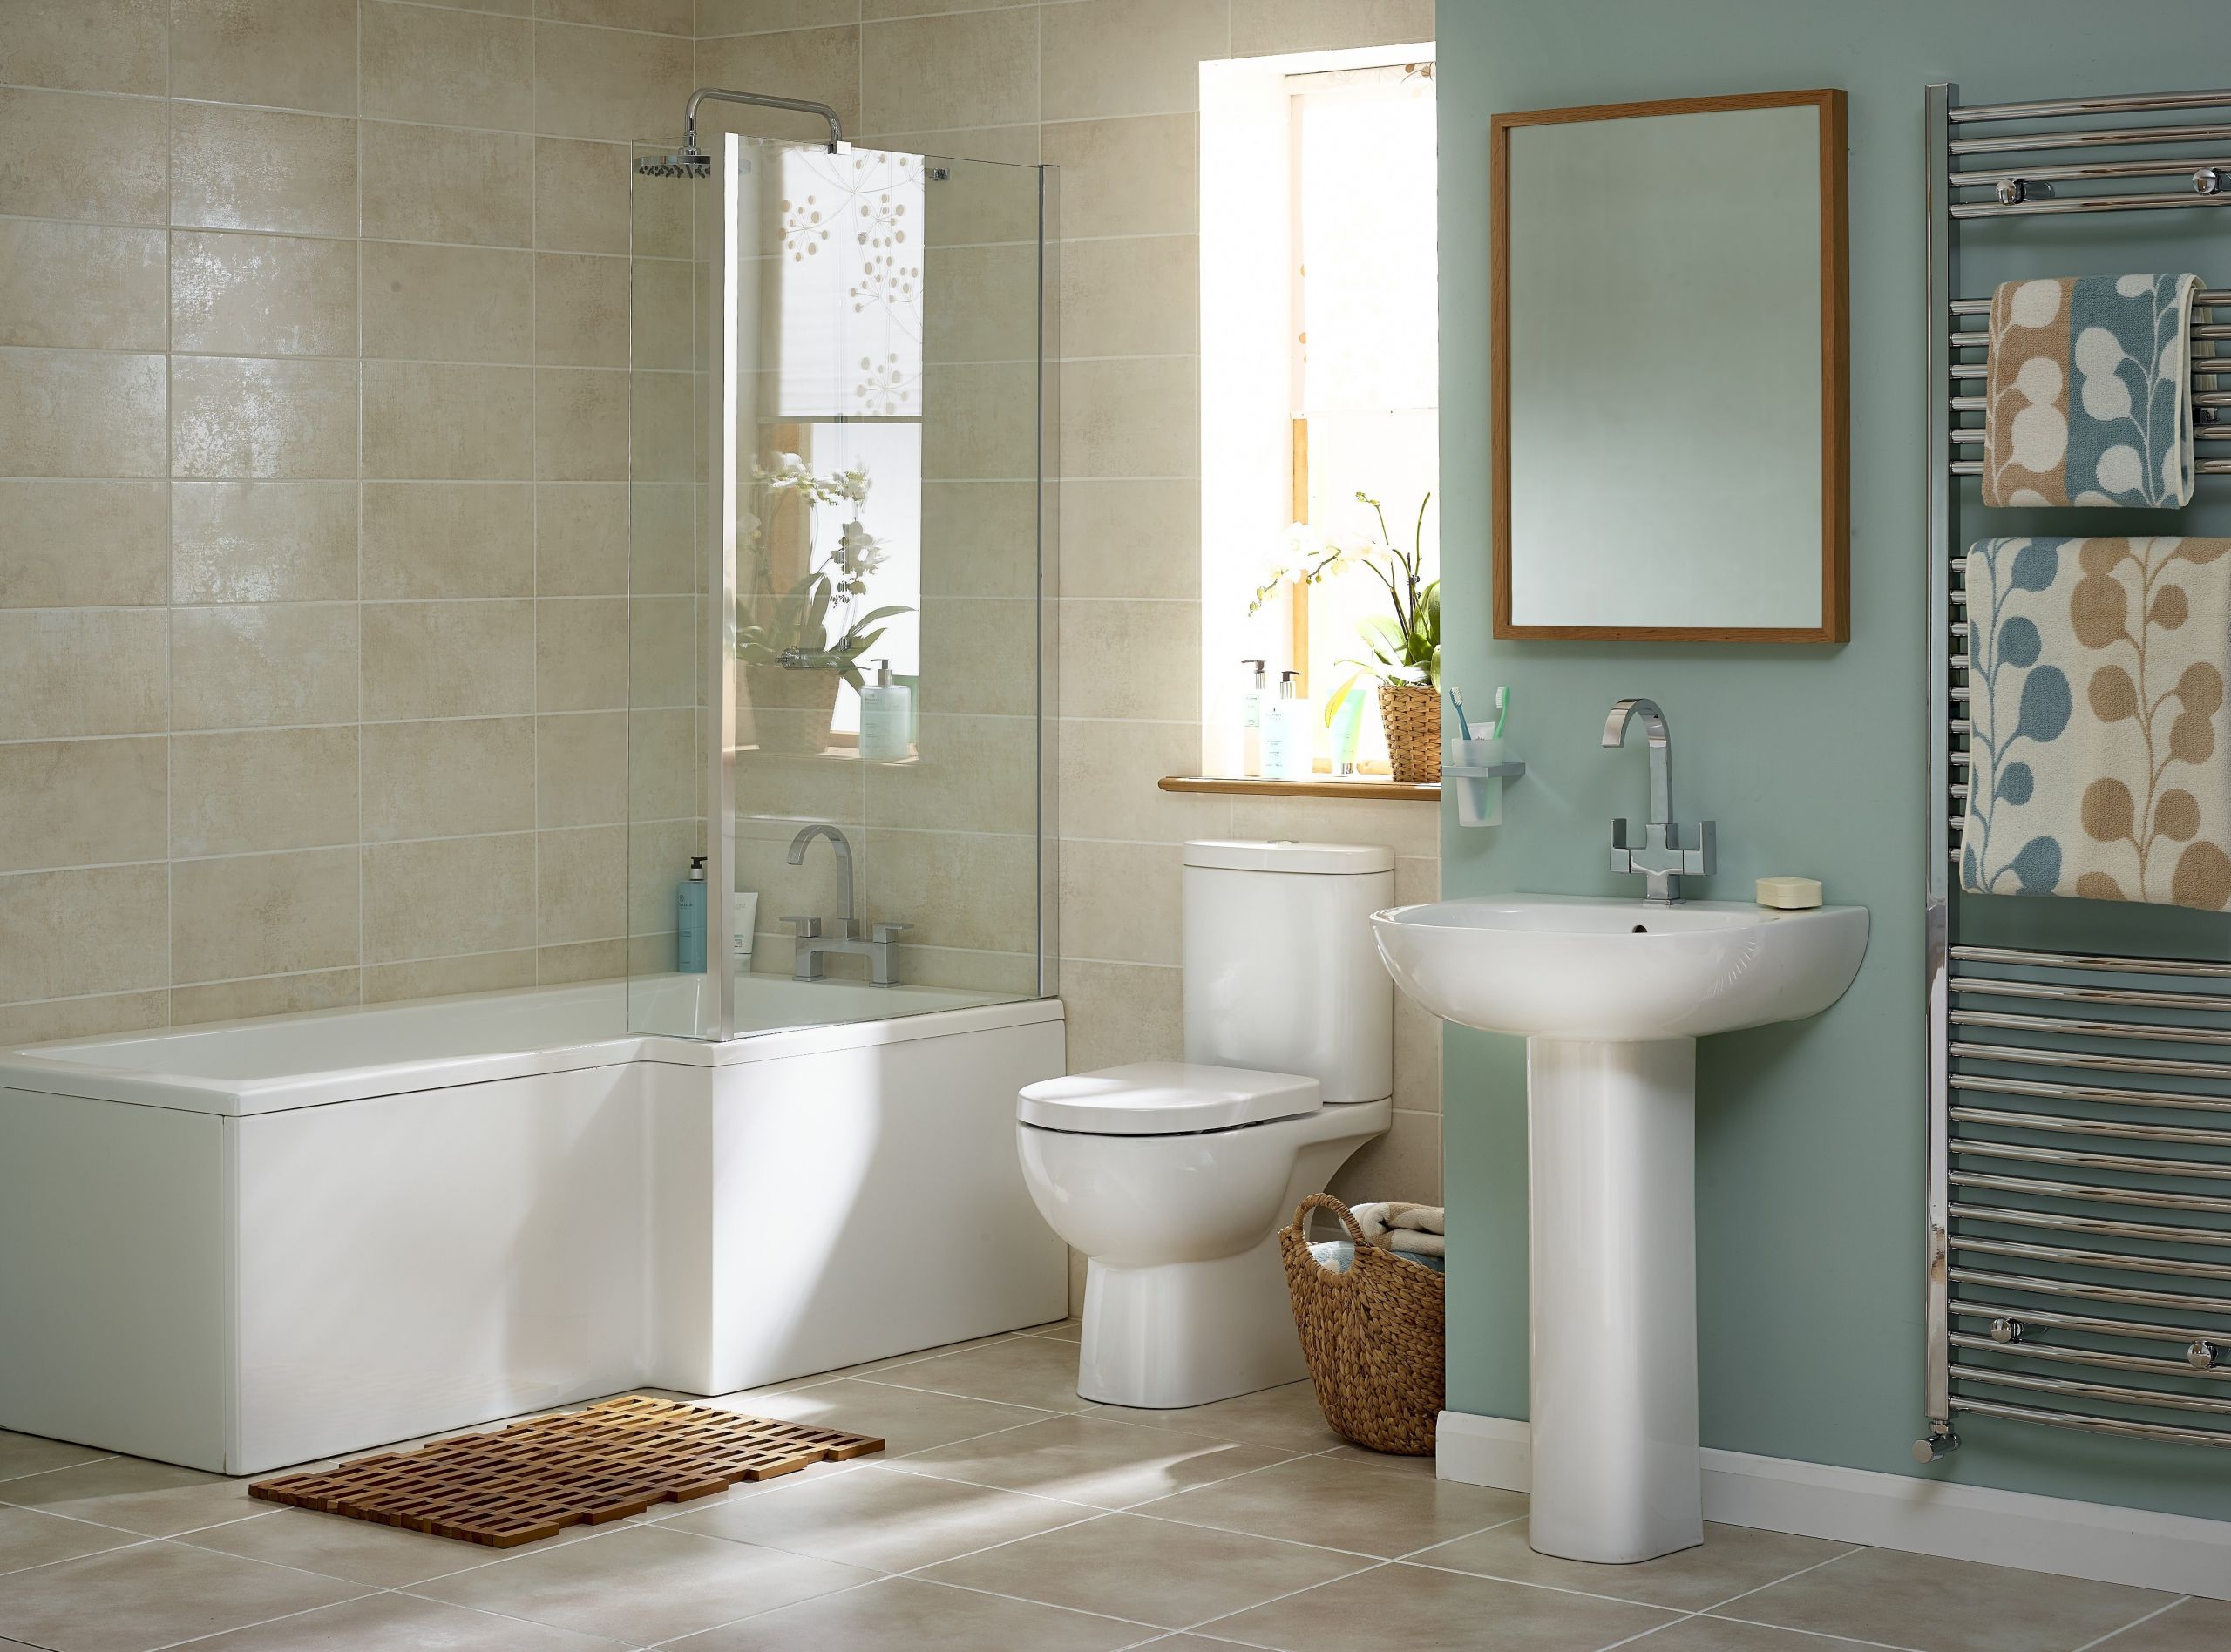 Images Of Bathroom Tile
 Eastbourne Bathrooms & Tiles Home For All Your Bathroom